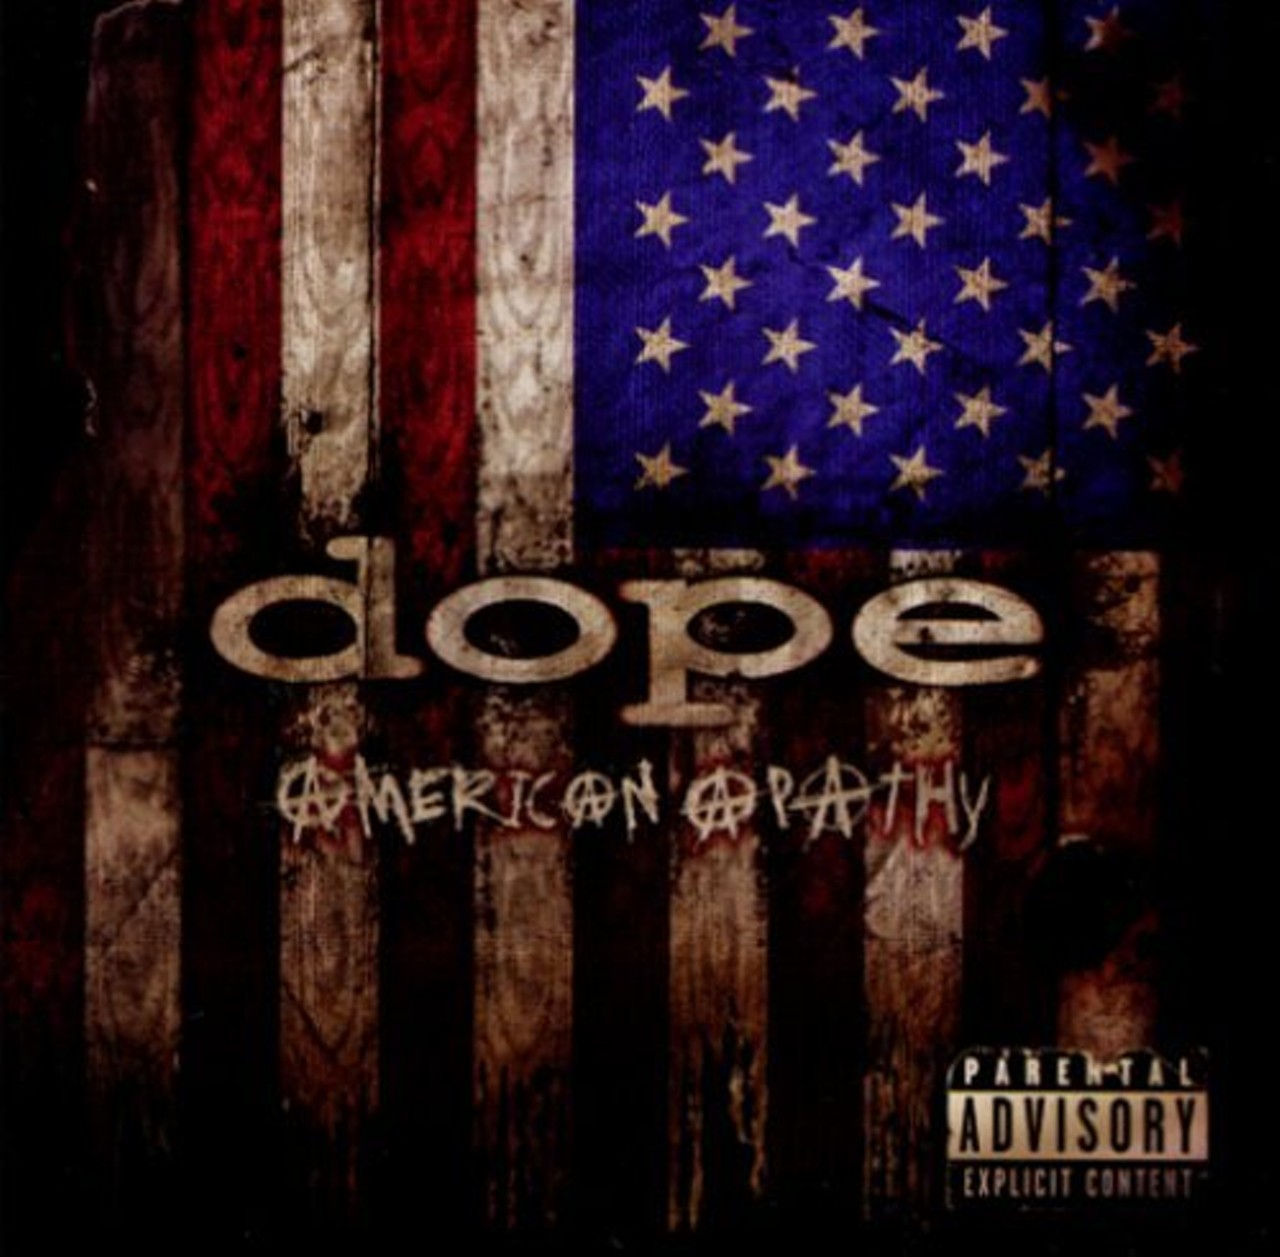 Dope - American Apathy (2005)
Aging nu-metal purveyors Dope released American Apathy almost six years ago. Perfect for your rebellious teenager. You can catch Dope at the one and only Gathering of the Juggalos later this year.